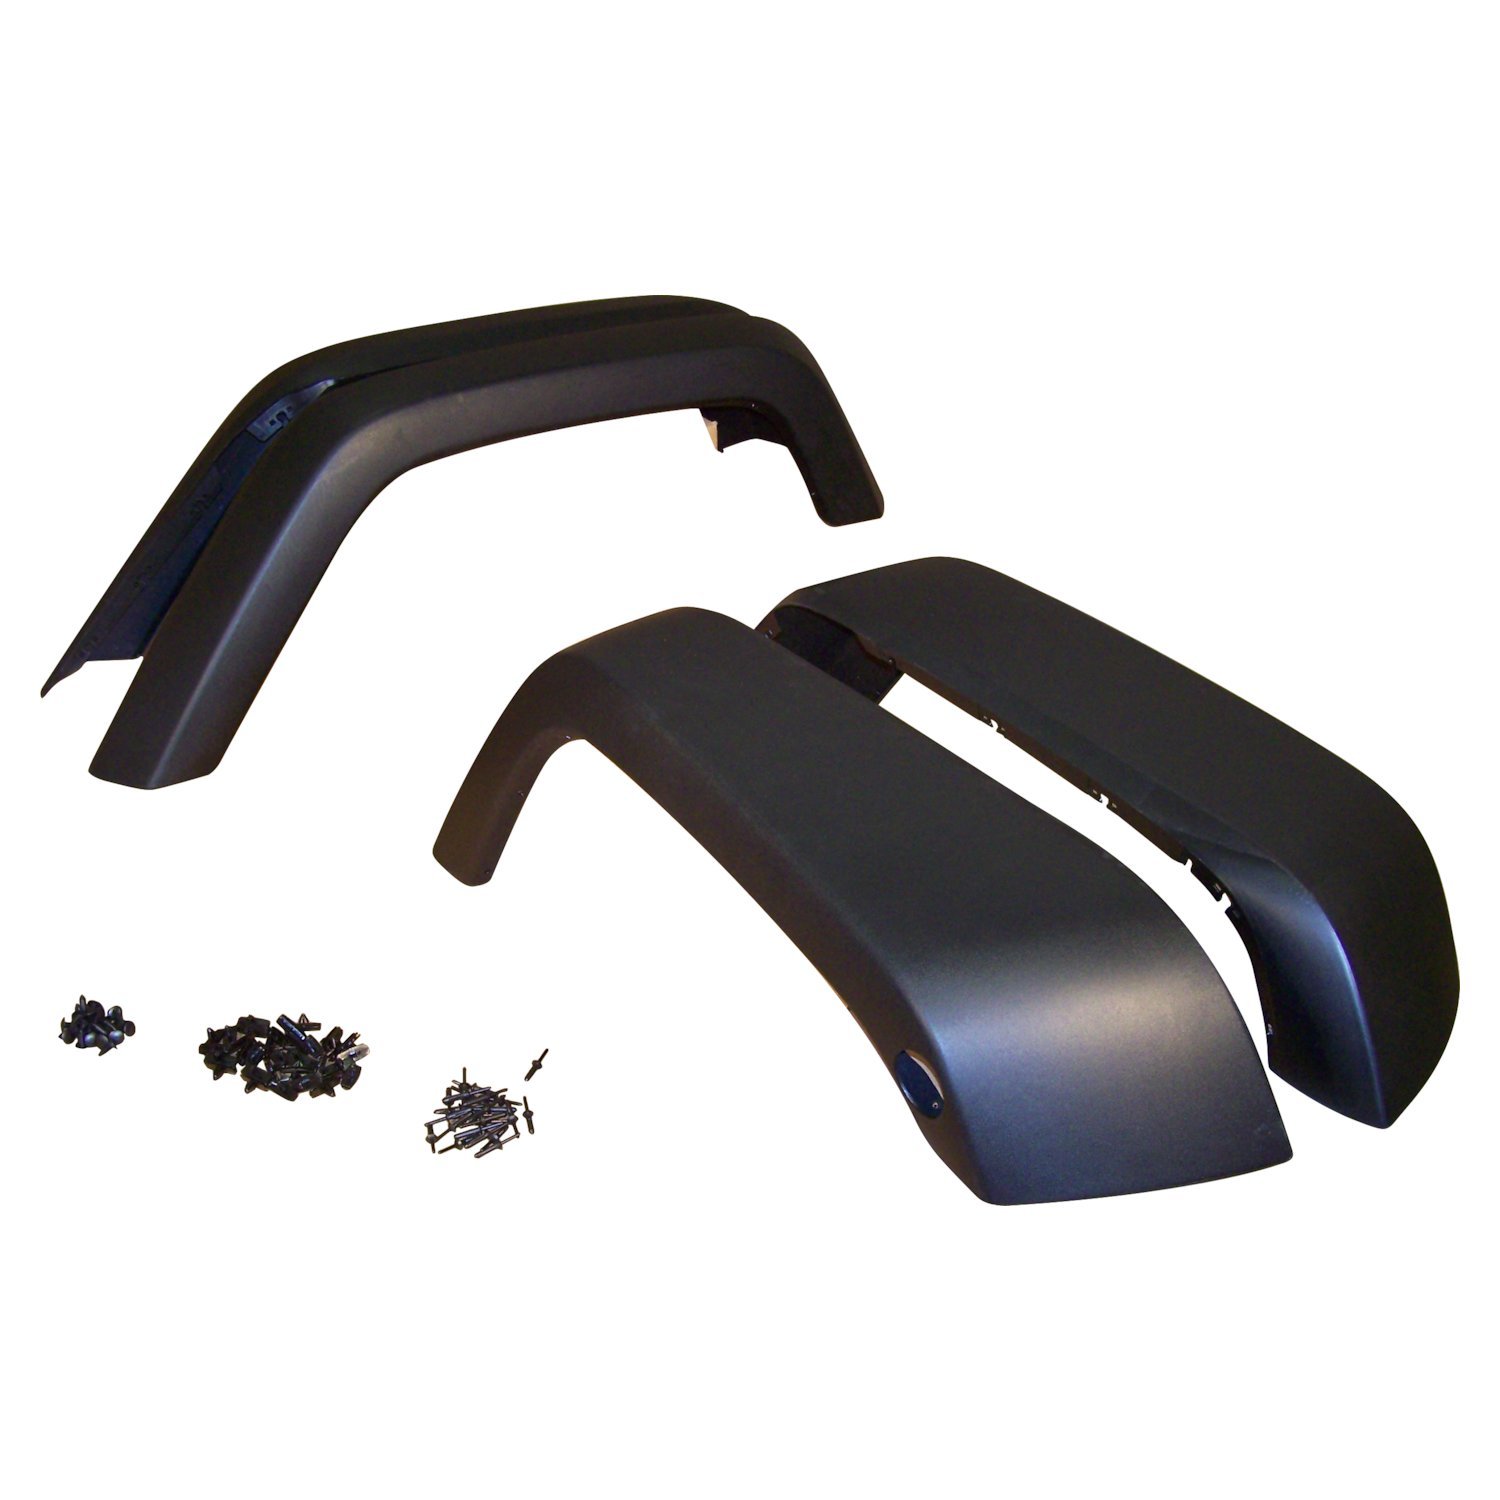 Black Textured Flare Kit for JK Wranglers, 4 Flares, Retainers and Rivets